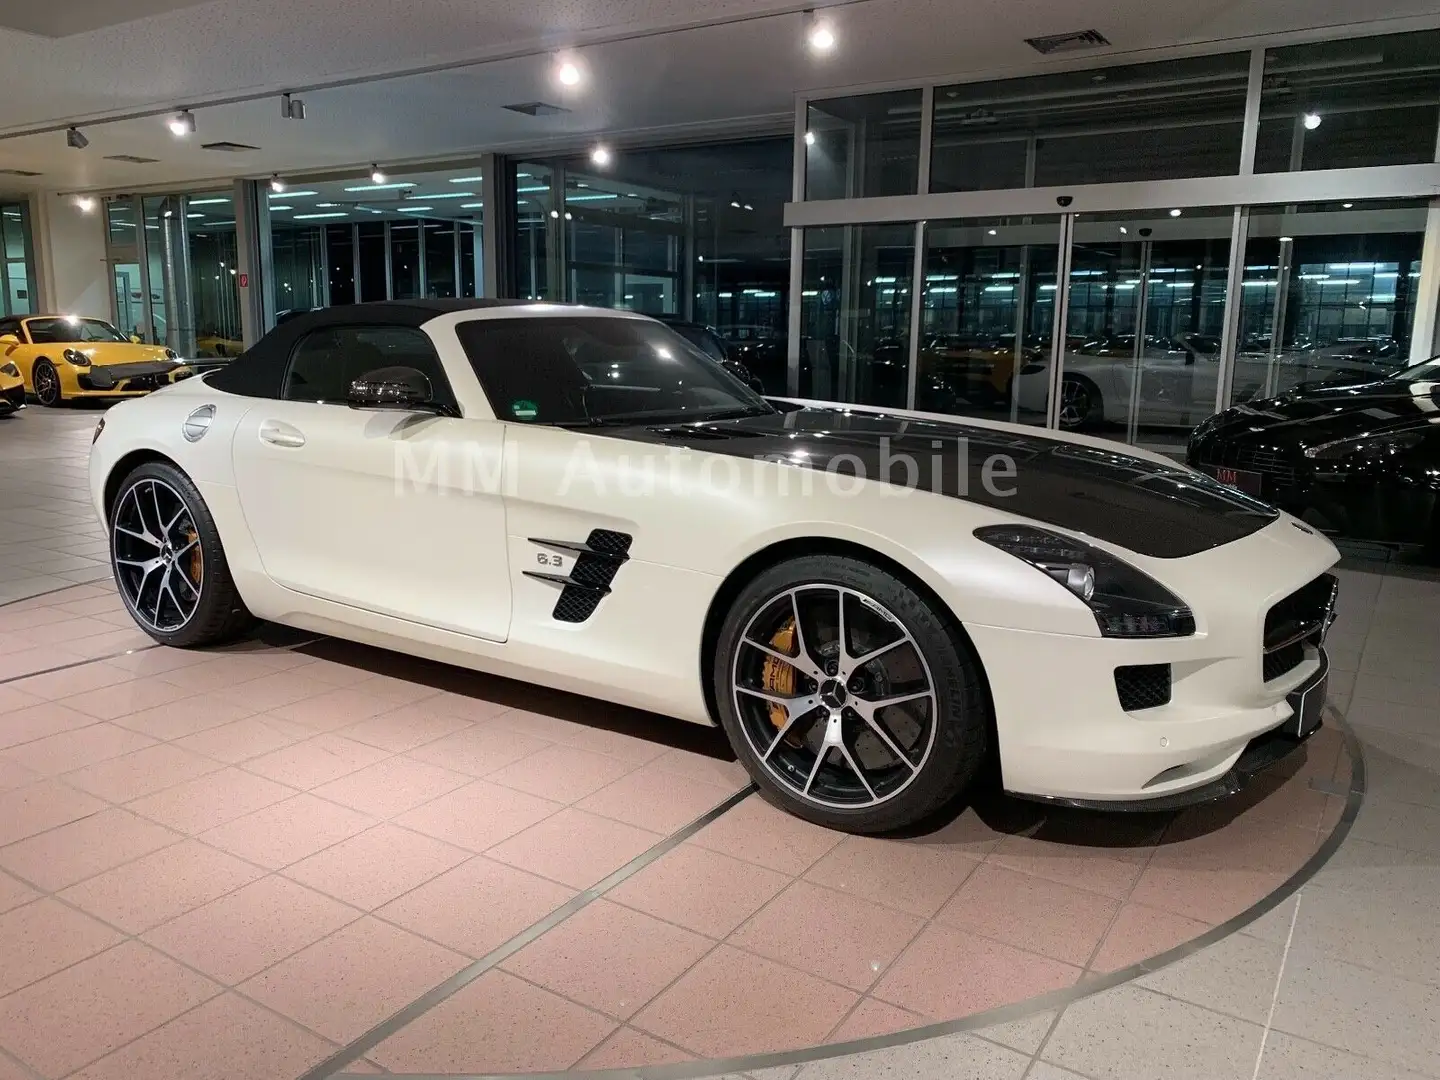 Mercedes-Benz SLS Roadster GT FINAL EDITION  "1 OF 350" White - 2